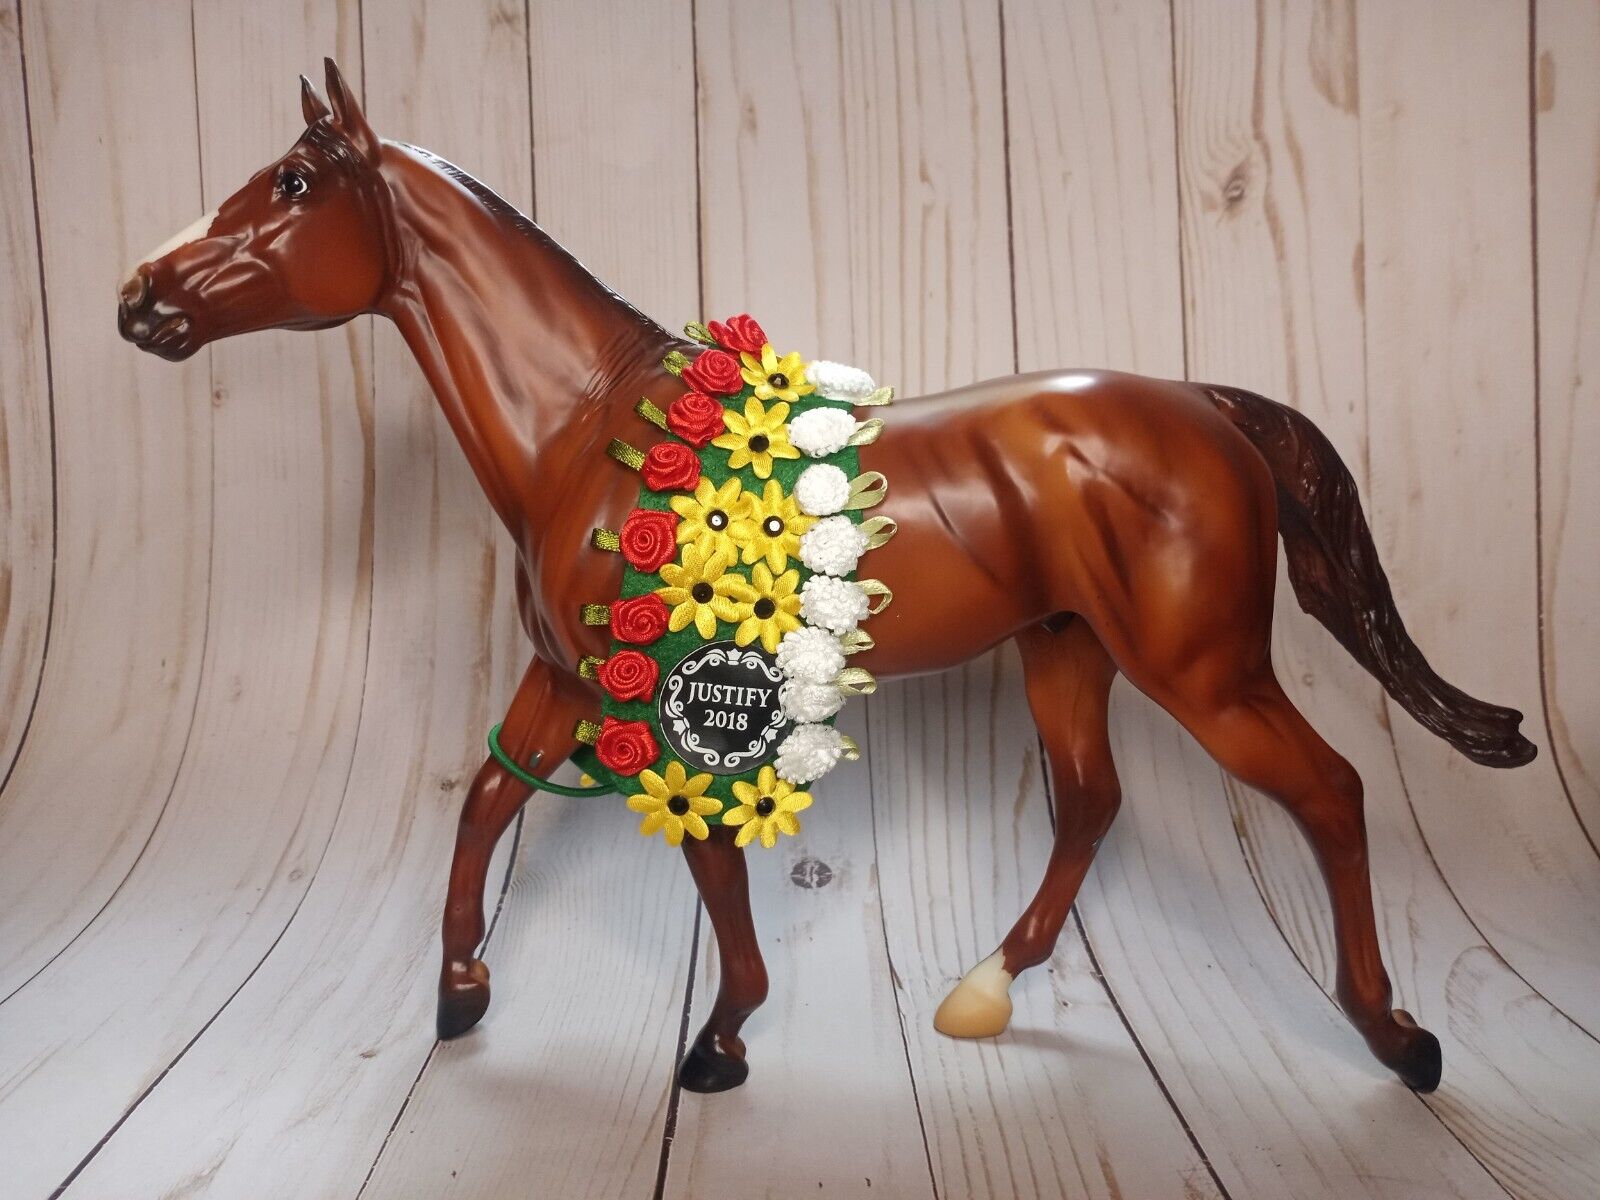 Breyer Justify Traditional Race Horse Triple Crown Chestnut Carrick Mold